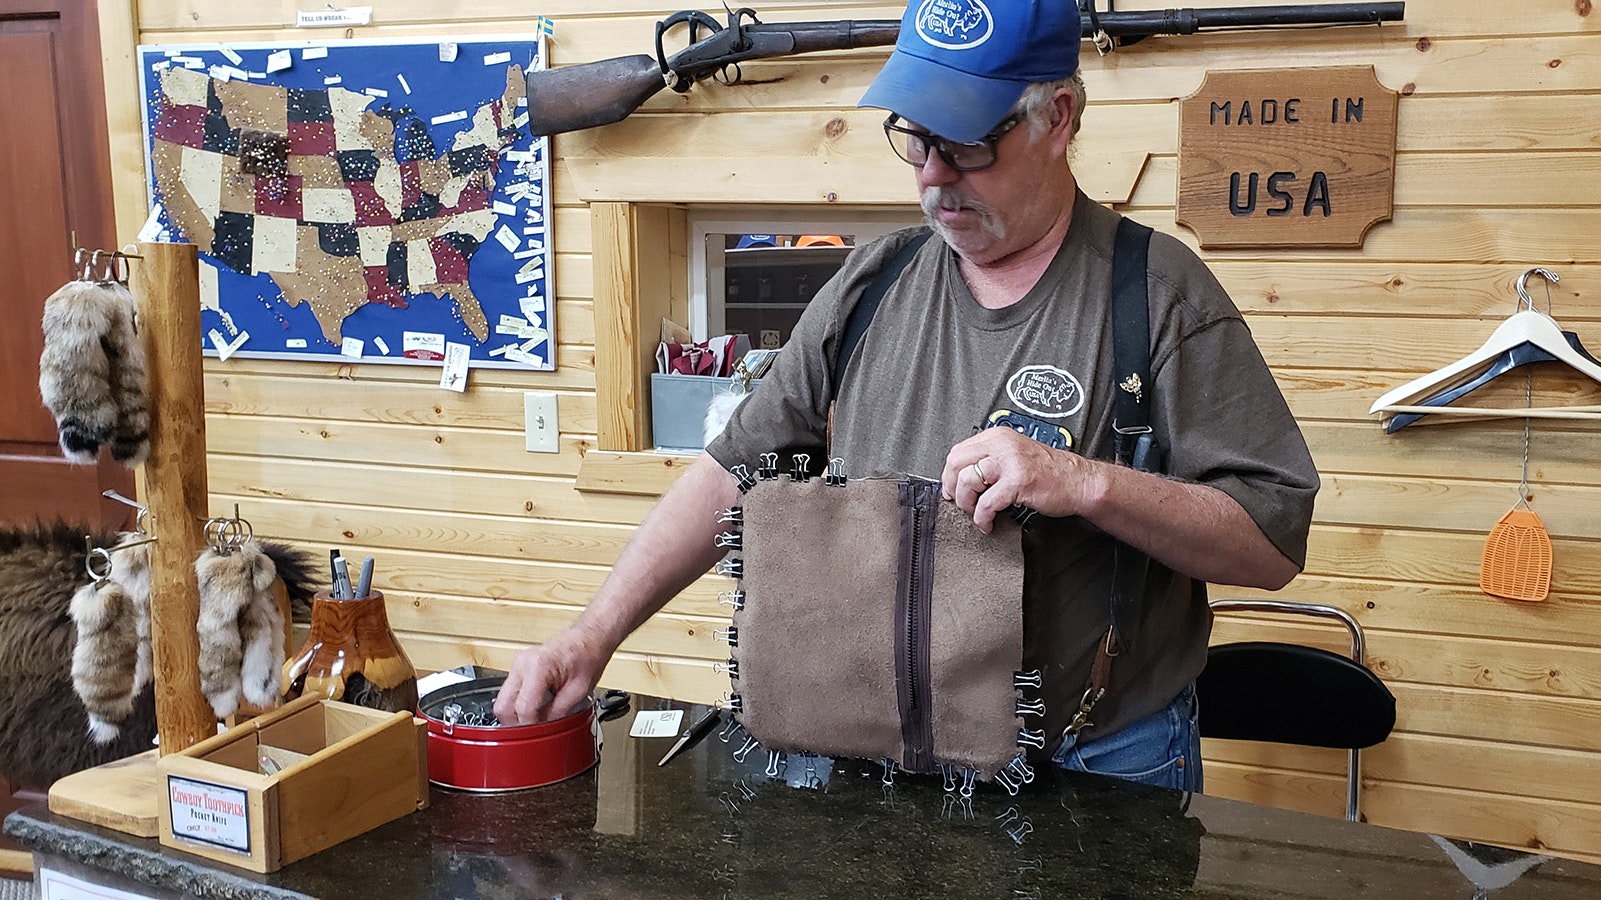 Merlin Heinze just likes to make things. While he's in the store with nothing else to do, he works on making a few more buffalo fur pillows.